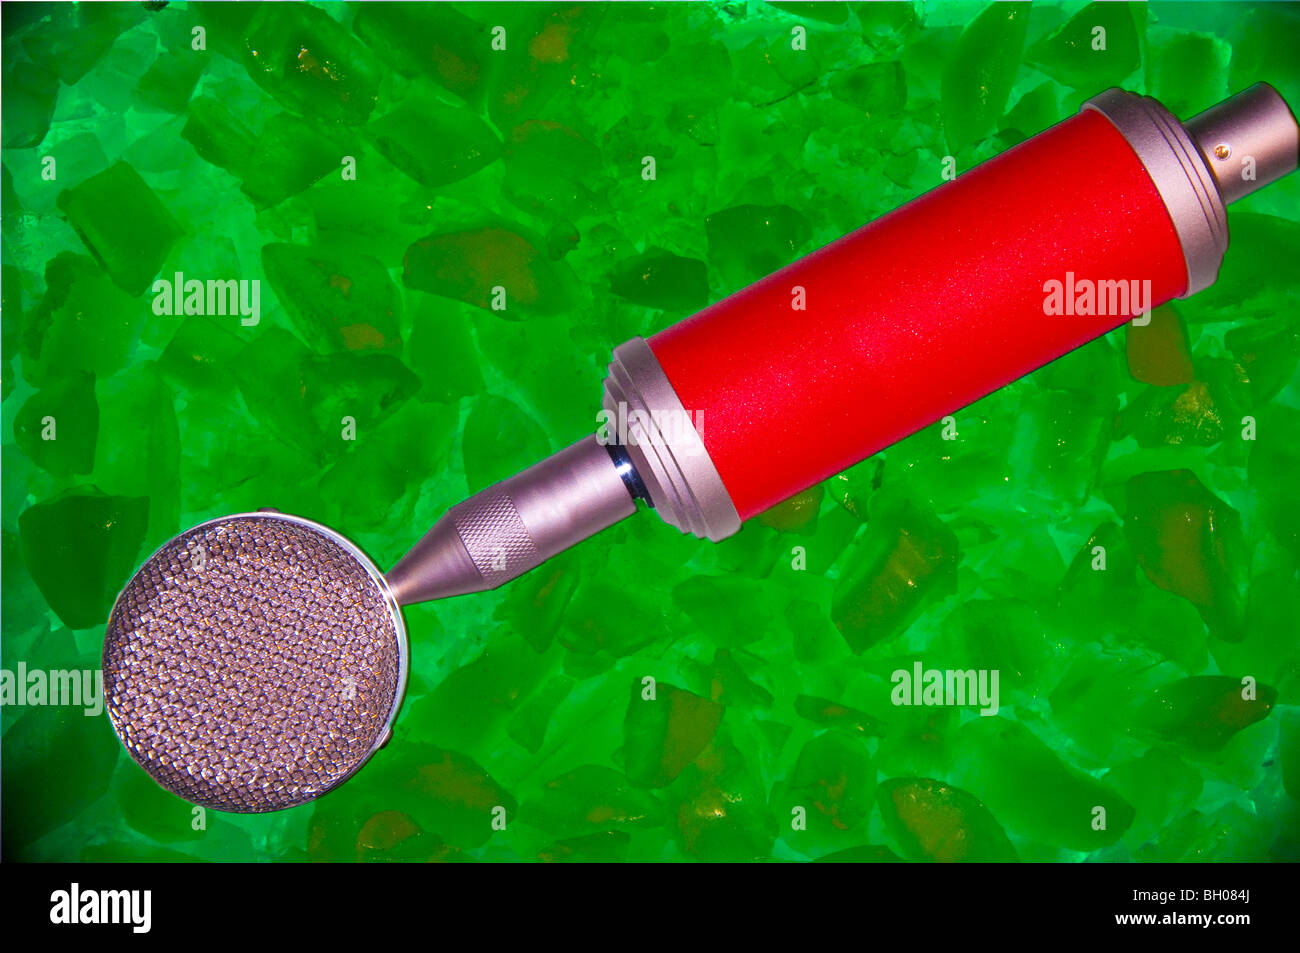 Red microphone sitting on a bed of green ice.  Logos removed to allow for any use. Stock Photo